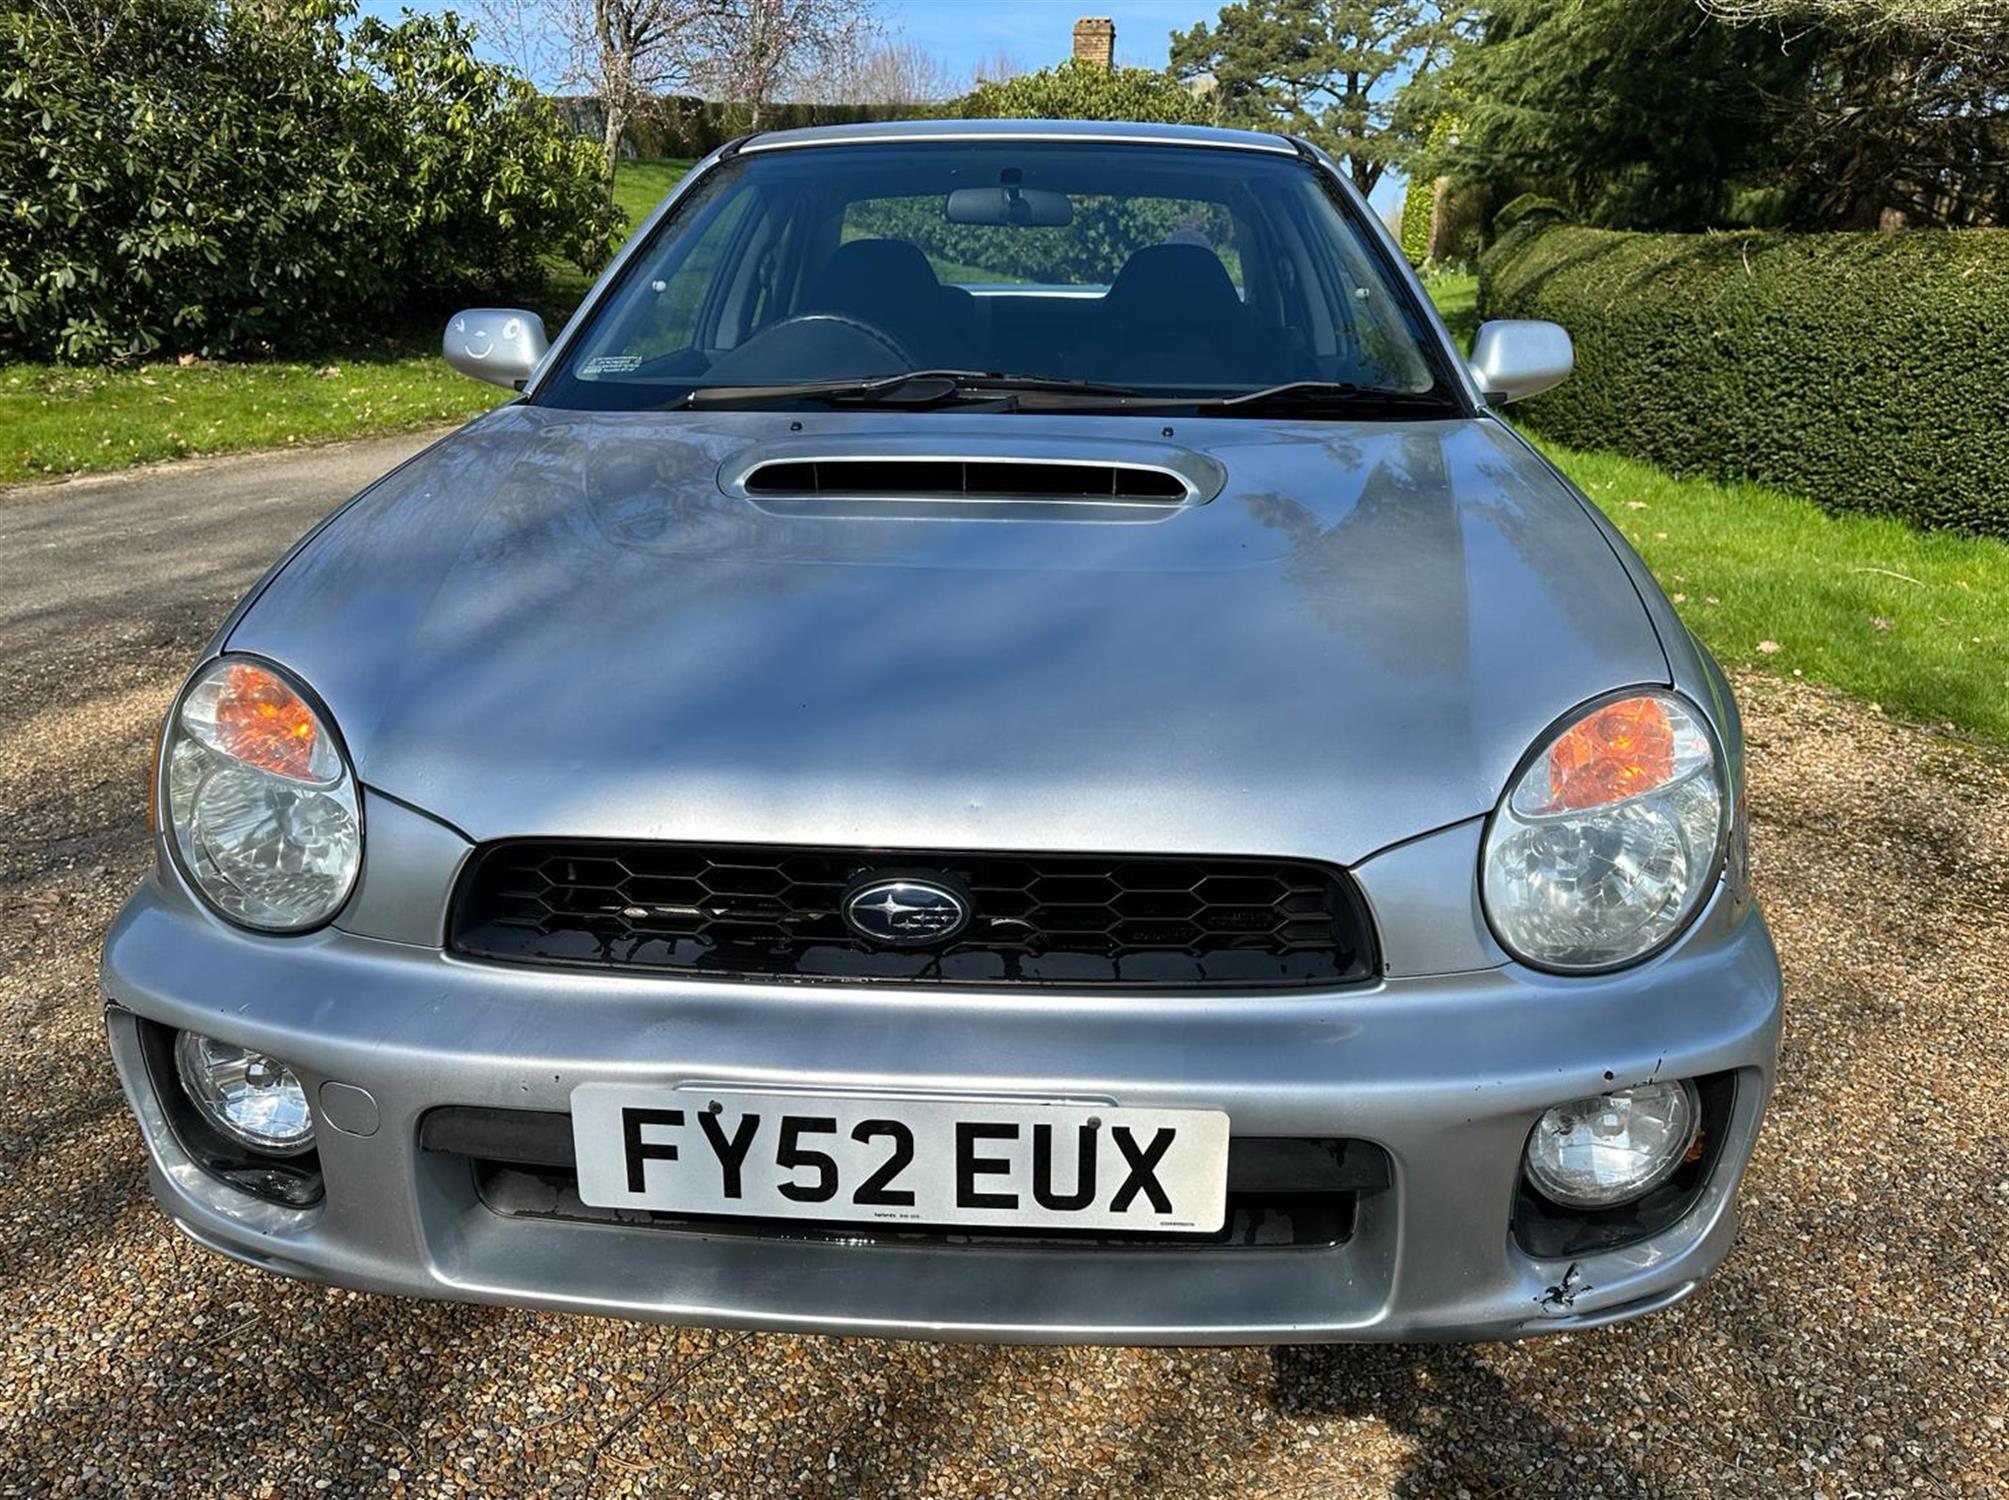 2002 Subaru Impreza 2.0 WRX AWD Turbo 4-dr Saloon. Registration: FY52 EUX. Finished in Silver. - Image 8 of 16